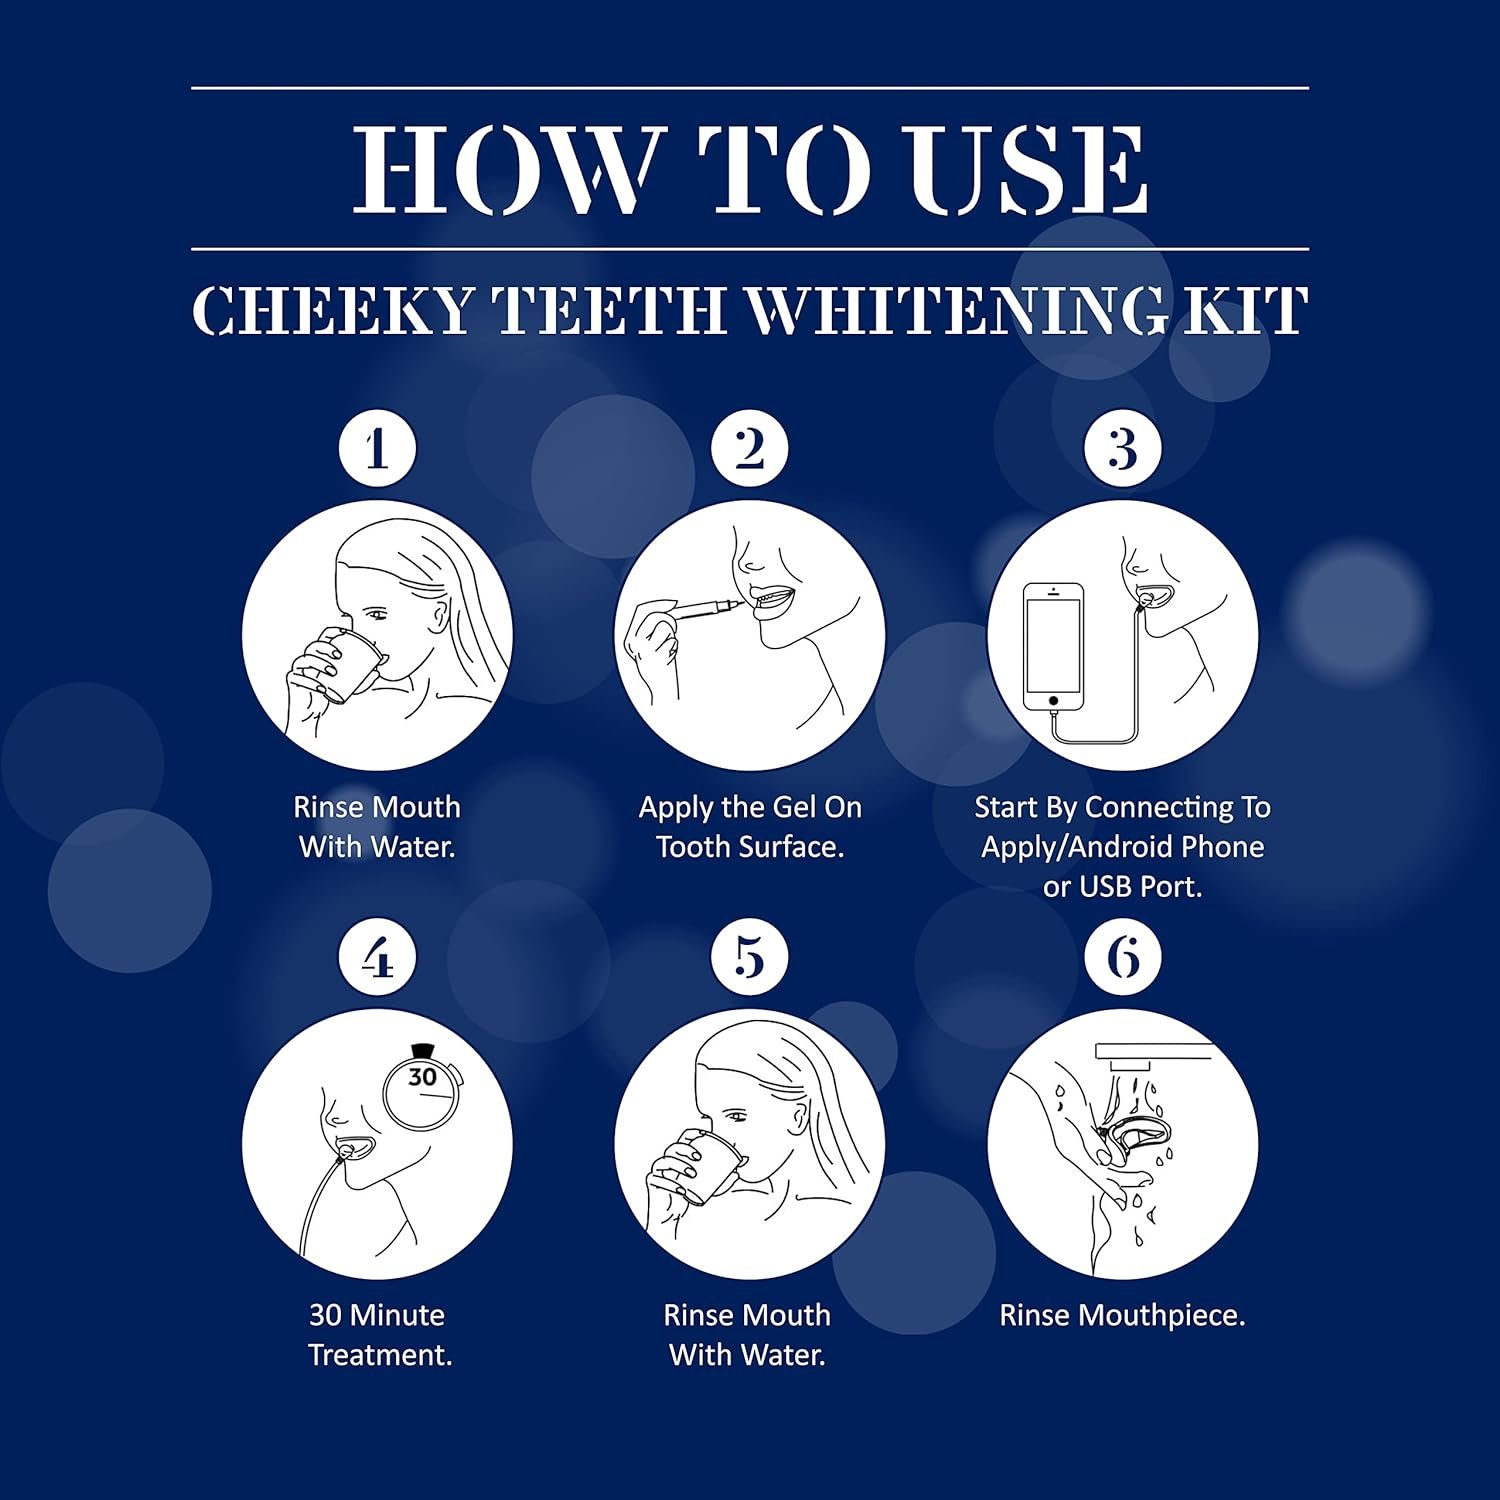 Cheeky LED Teeth Whitening Kit with Whitener Gel and Mouthpiece, DIY Home System to Diminish Stains and Discoloration, Dental and Enamel Safe